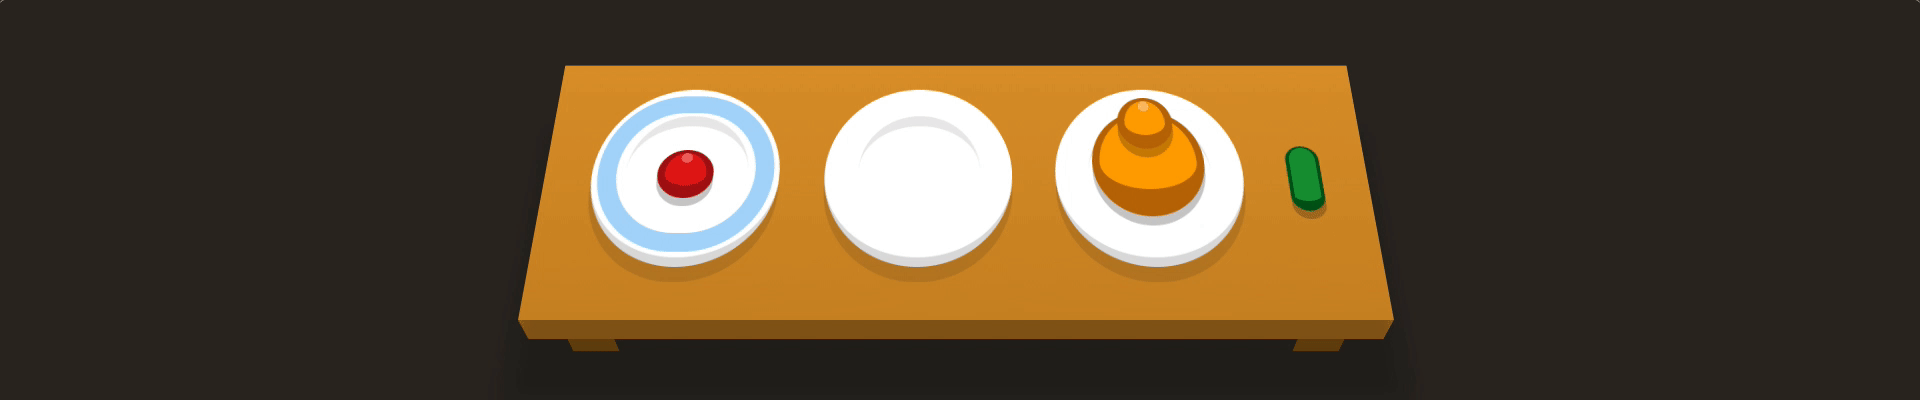 CSS Diner